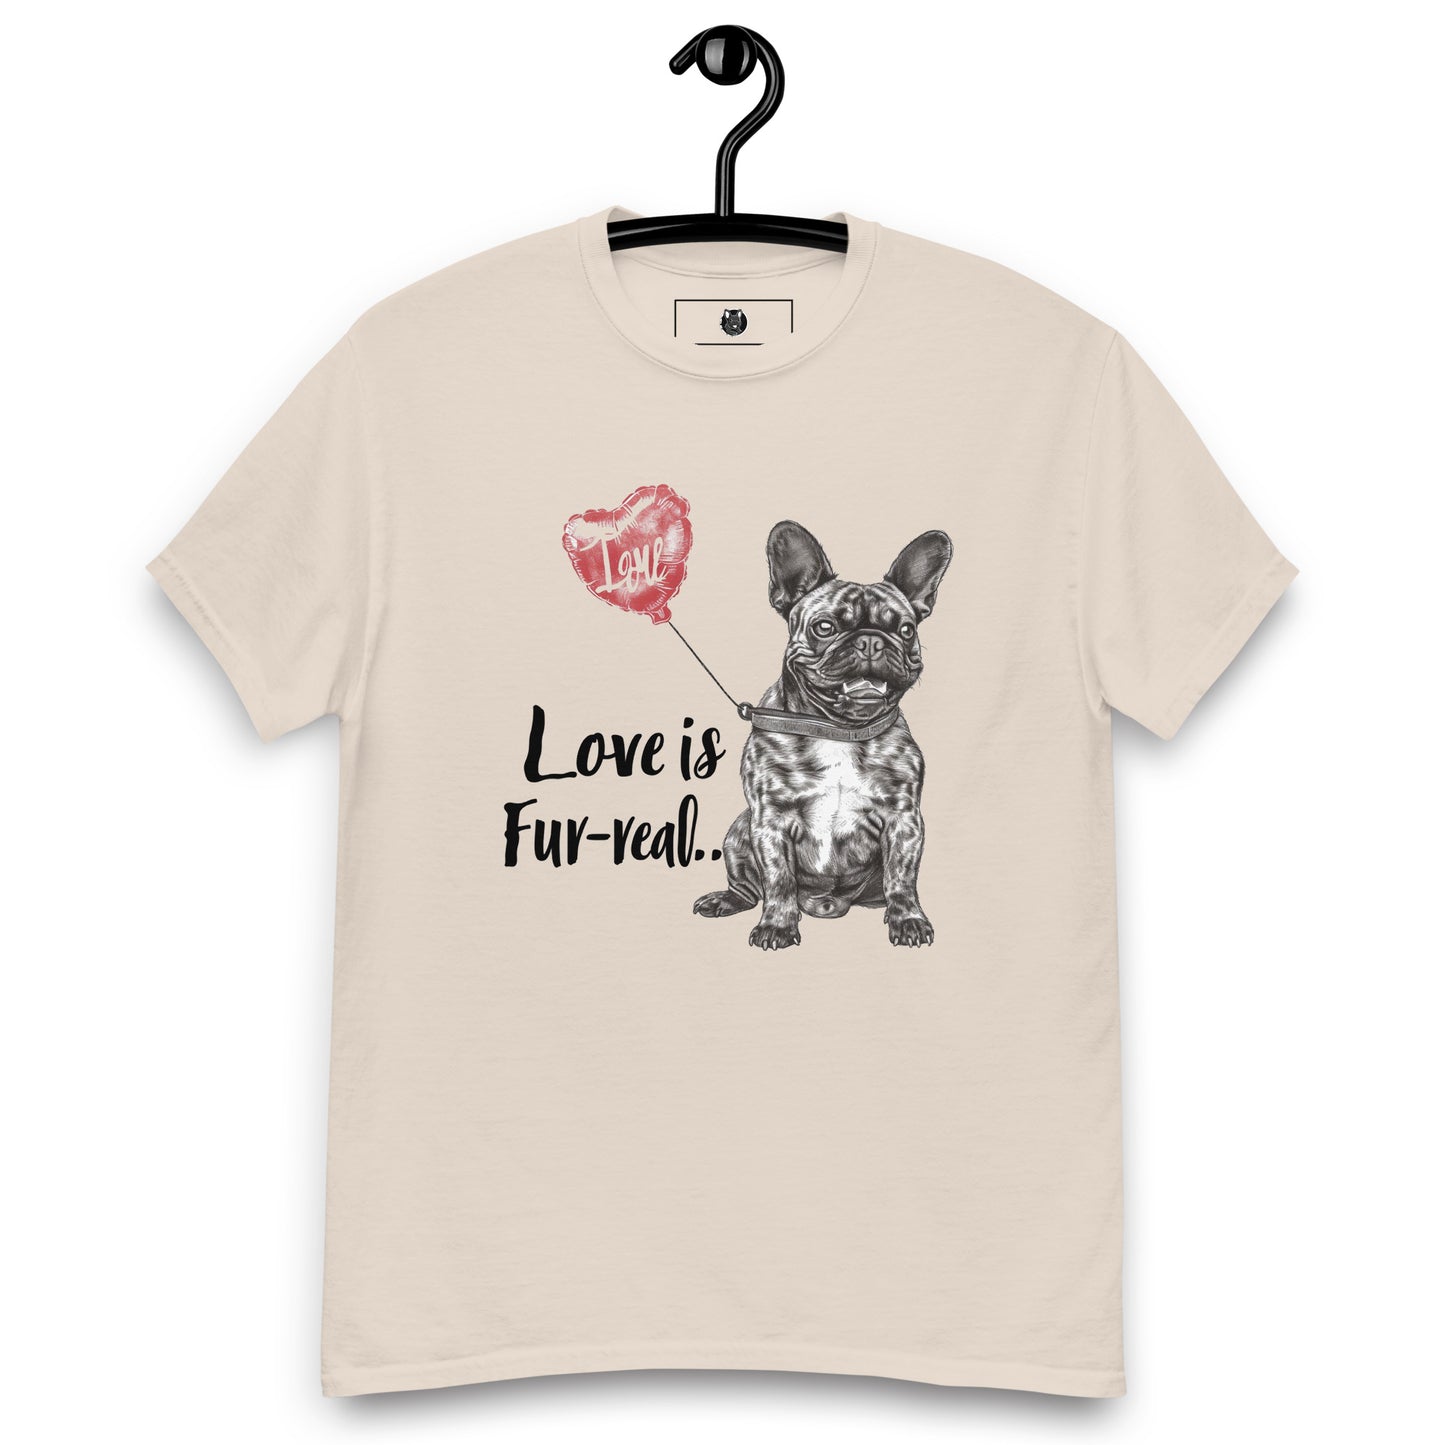 "Love is Fur-real" Unisex T-Shirt